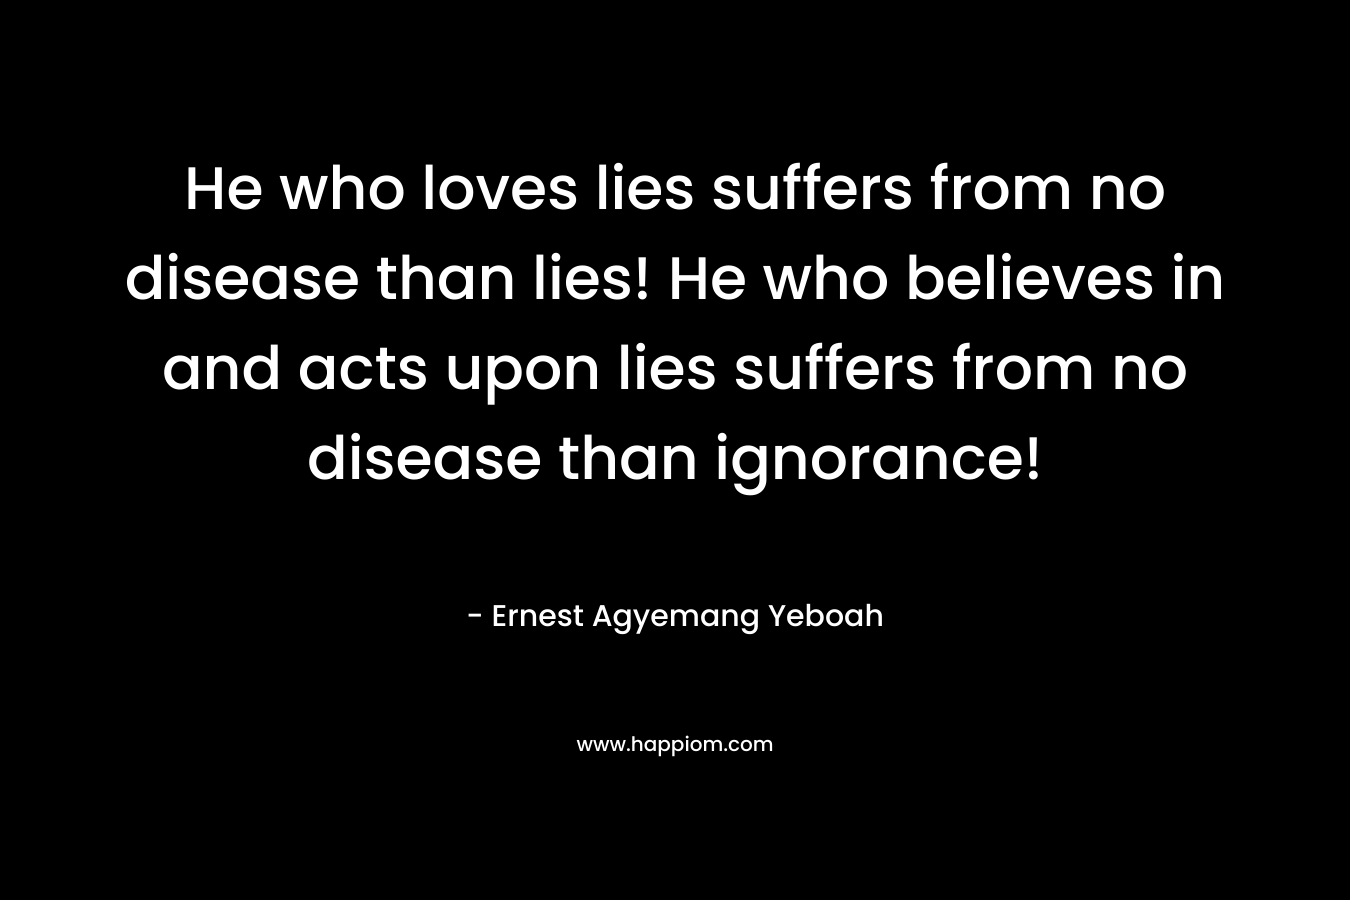 He who loves lies suffers from no disease than lies! He who believes in and acts upon lies suffers from no disease than ignorance!